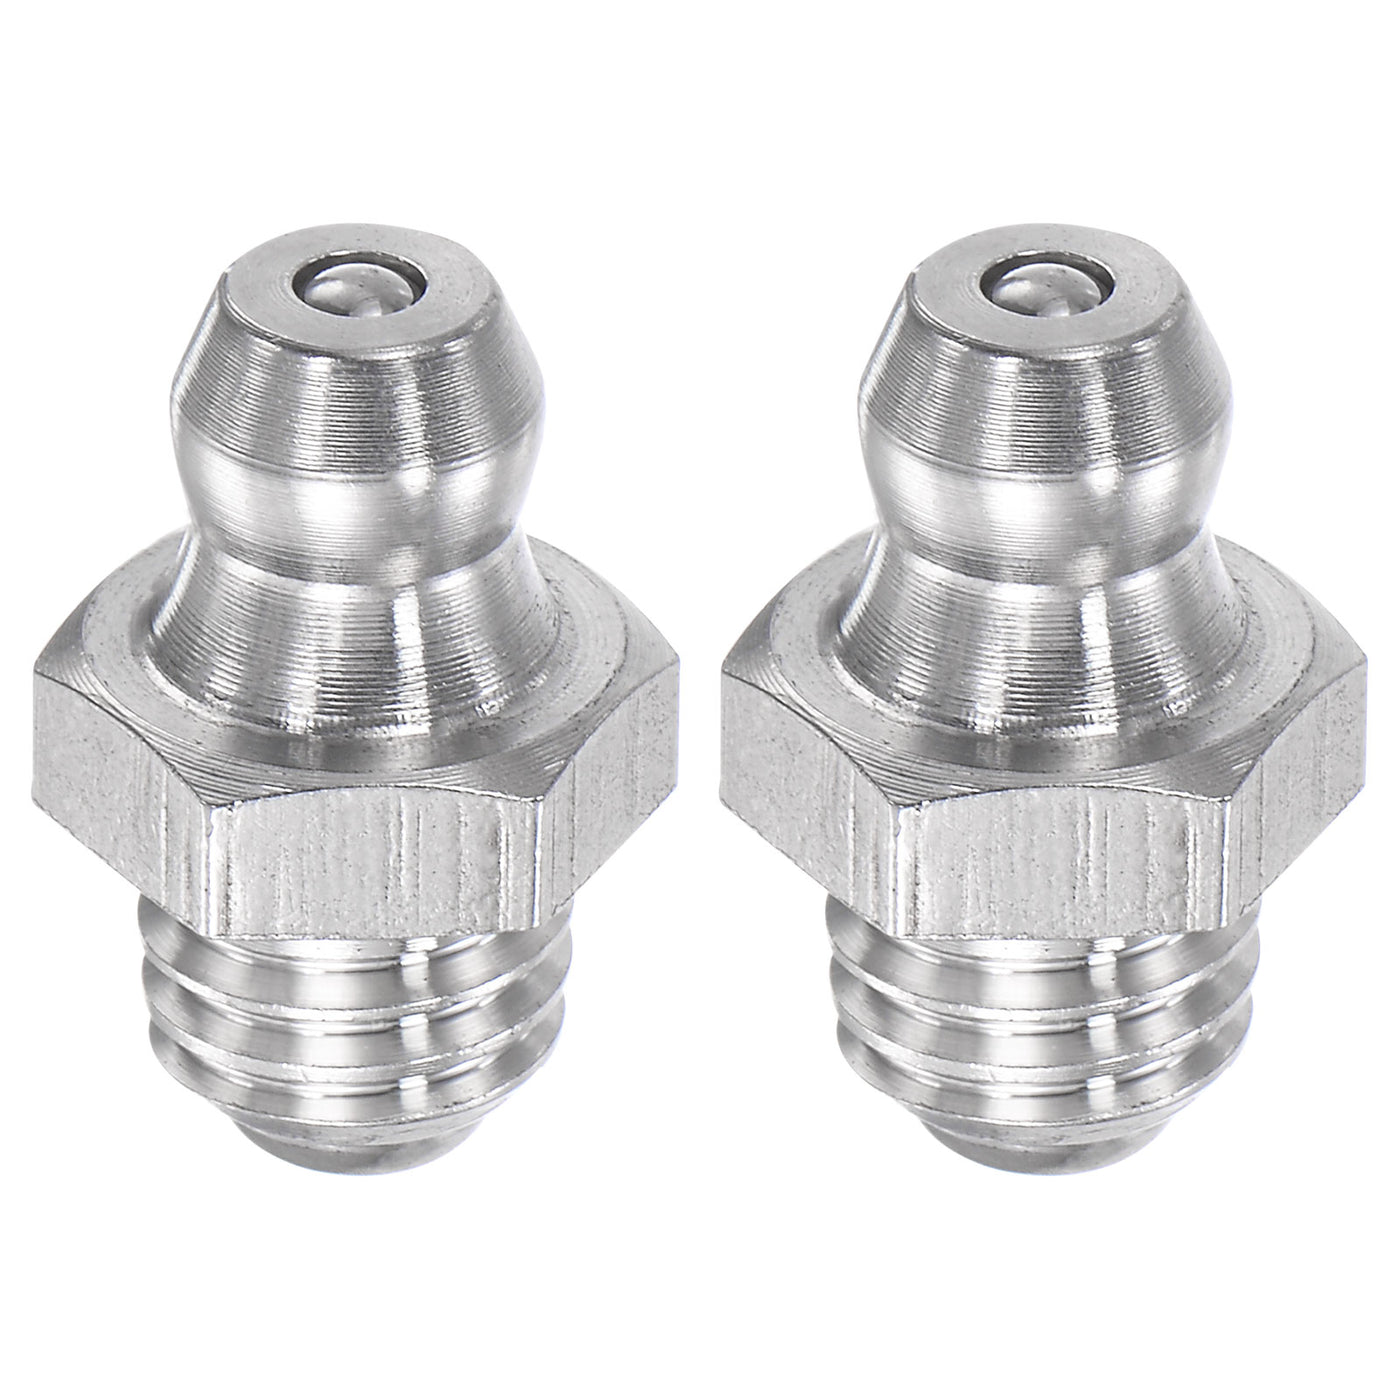 uxcell Uxcell 2Pcs Metric Stainless Steel Straight Hydraulic Grease Fitting M8 x 1.25mm Thread